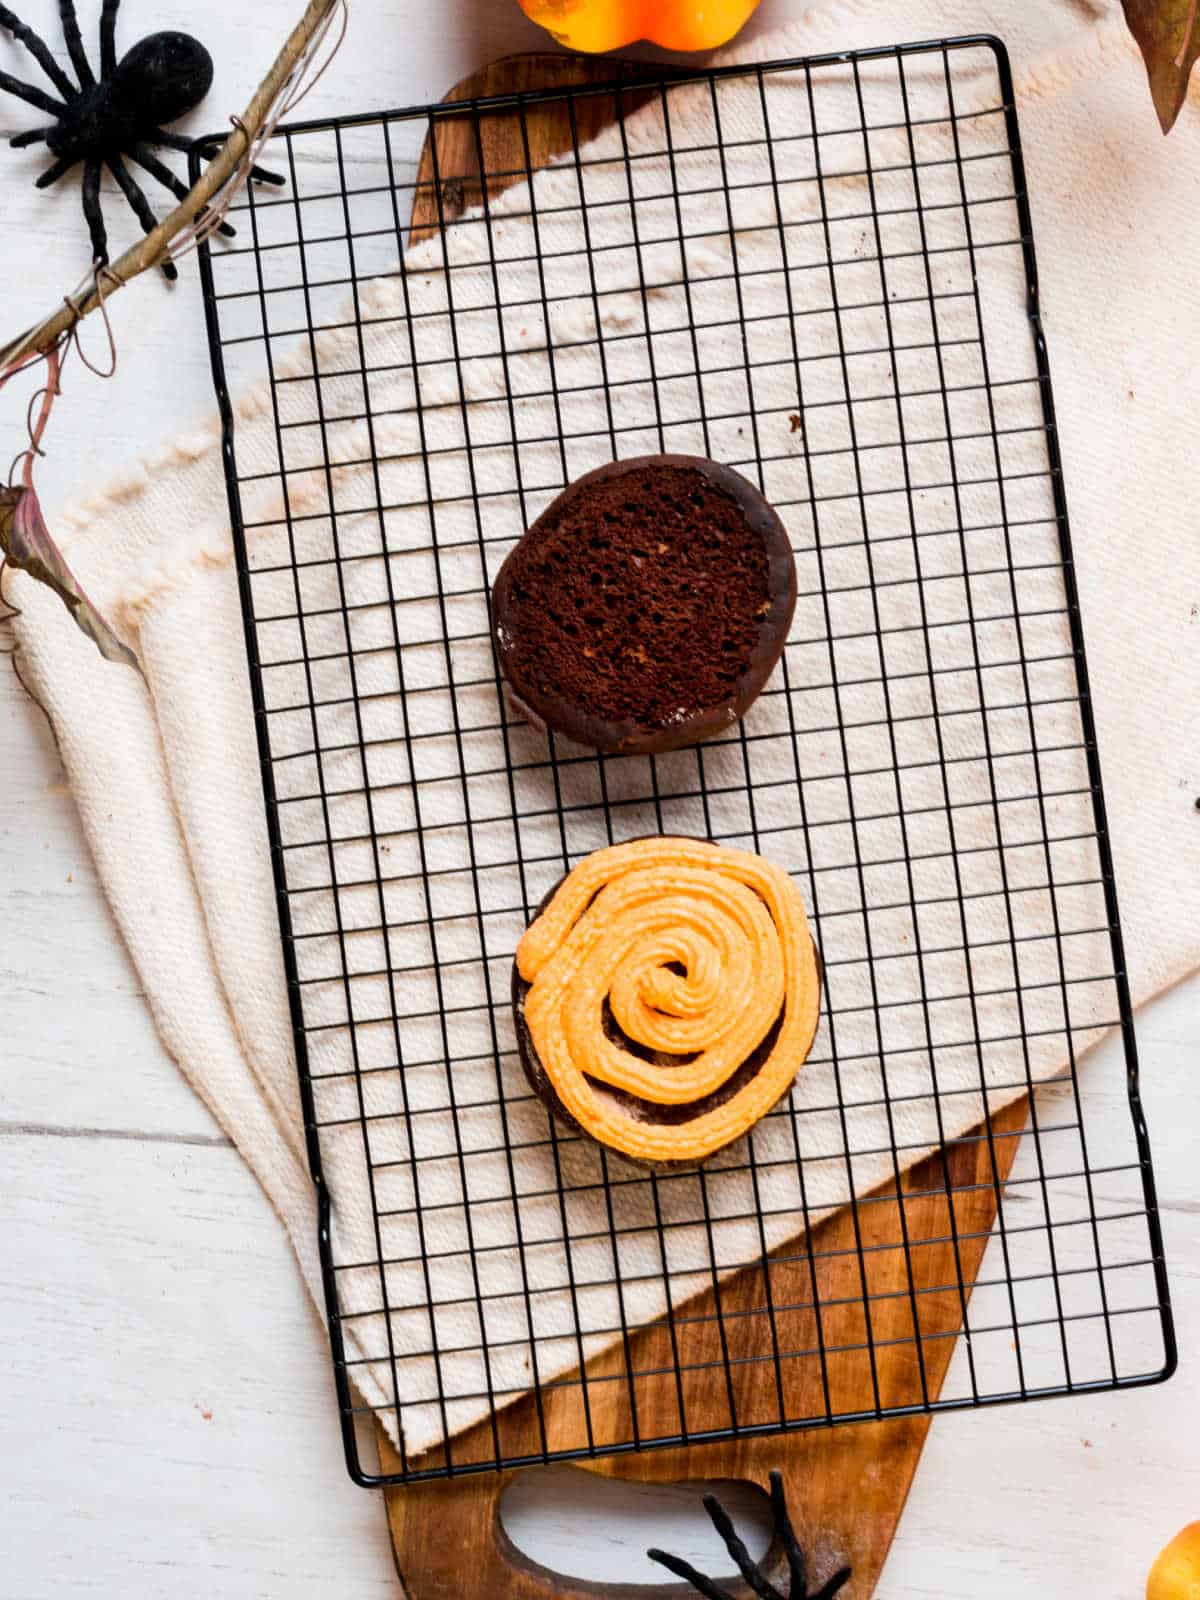 Black wire rack with two chocolate soft cookies; one has an orange filling.